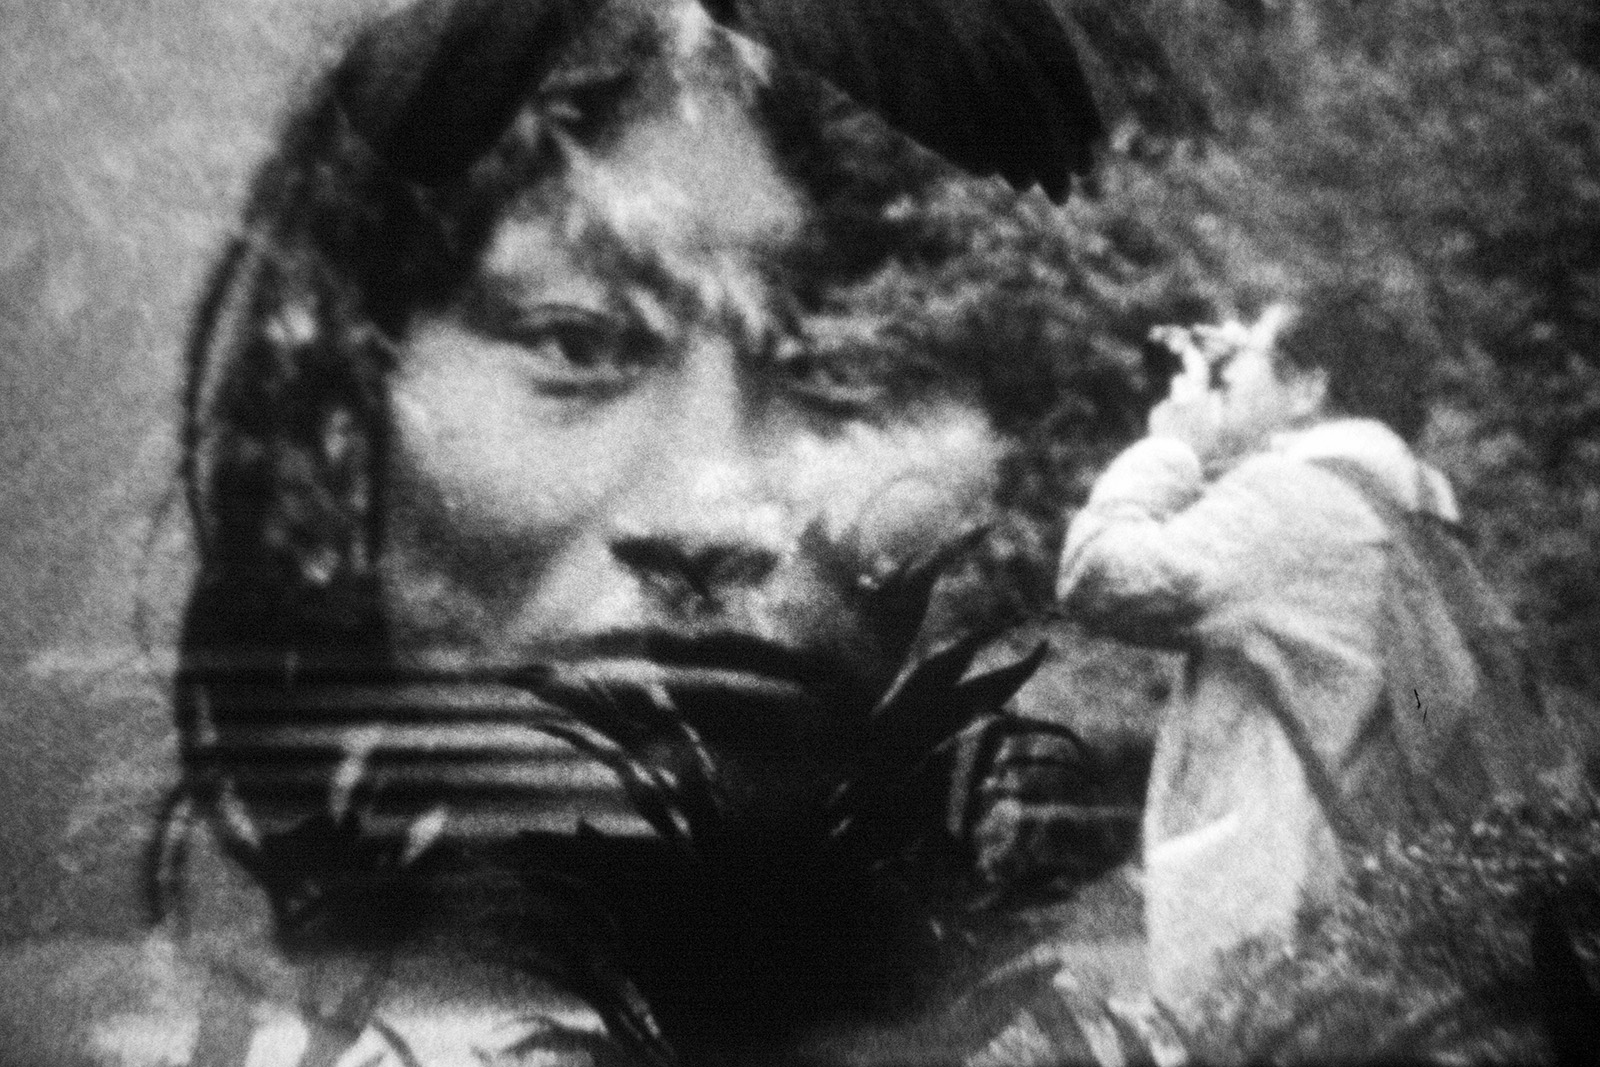 A man photographs a screen showing a head of an indigenous person